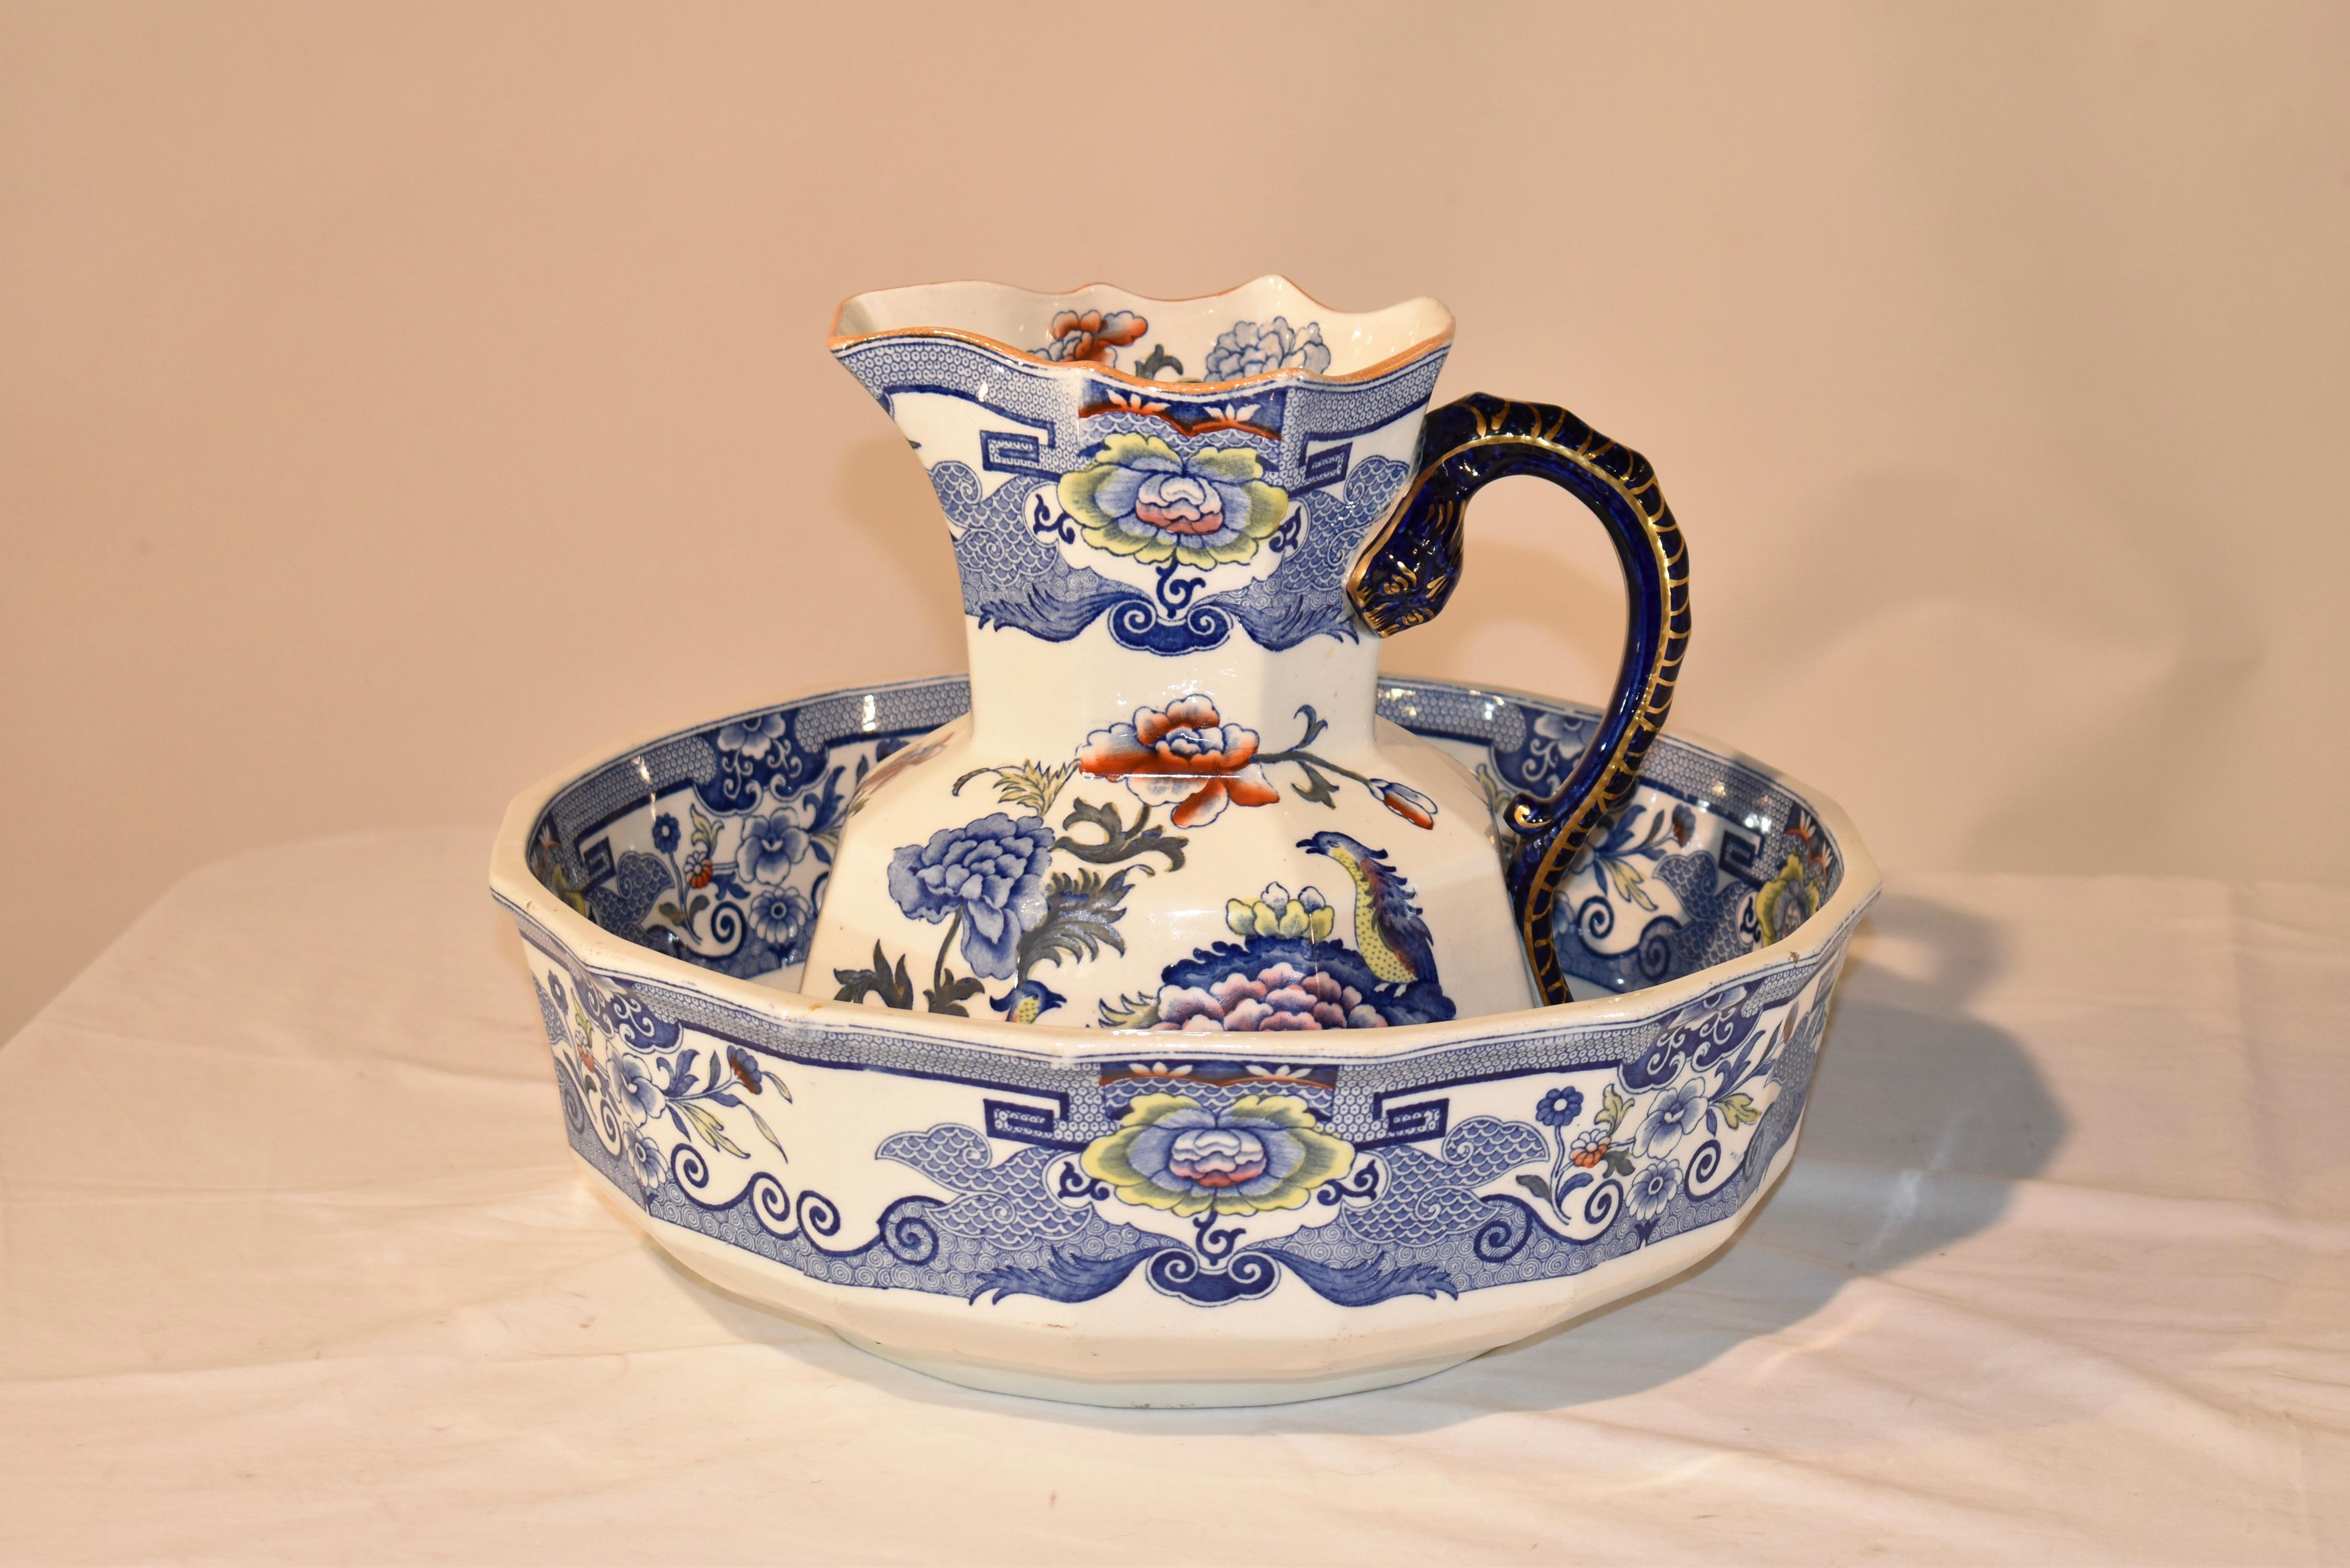 Rare early 19th Century Mason's Ironstone five piece bath set consisting of an oversized highly decorated pitcher and bowl set for holding water and a wash basin, chamber pot, soap dish with original removable strainer dish, and a large waste bucket